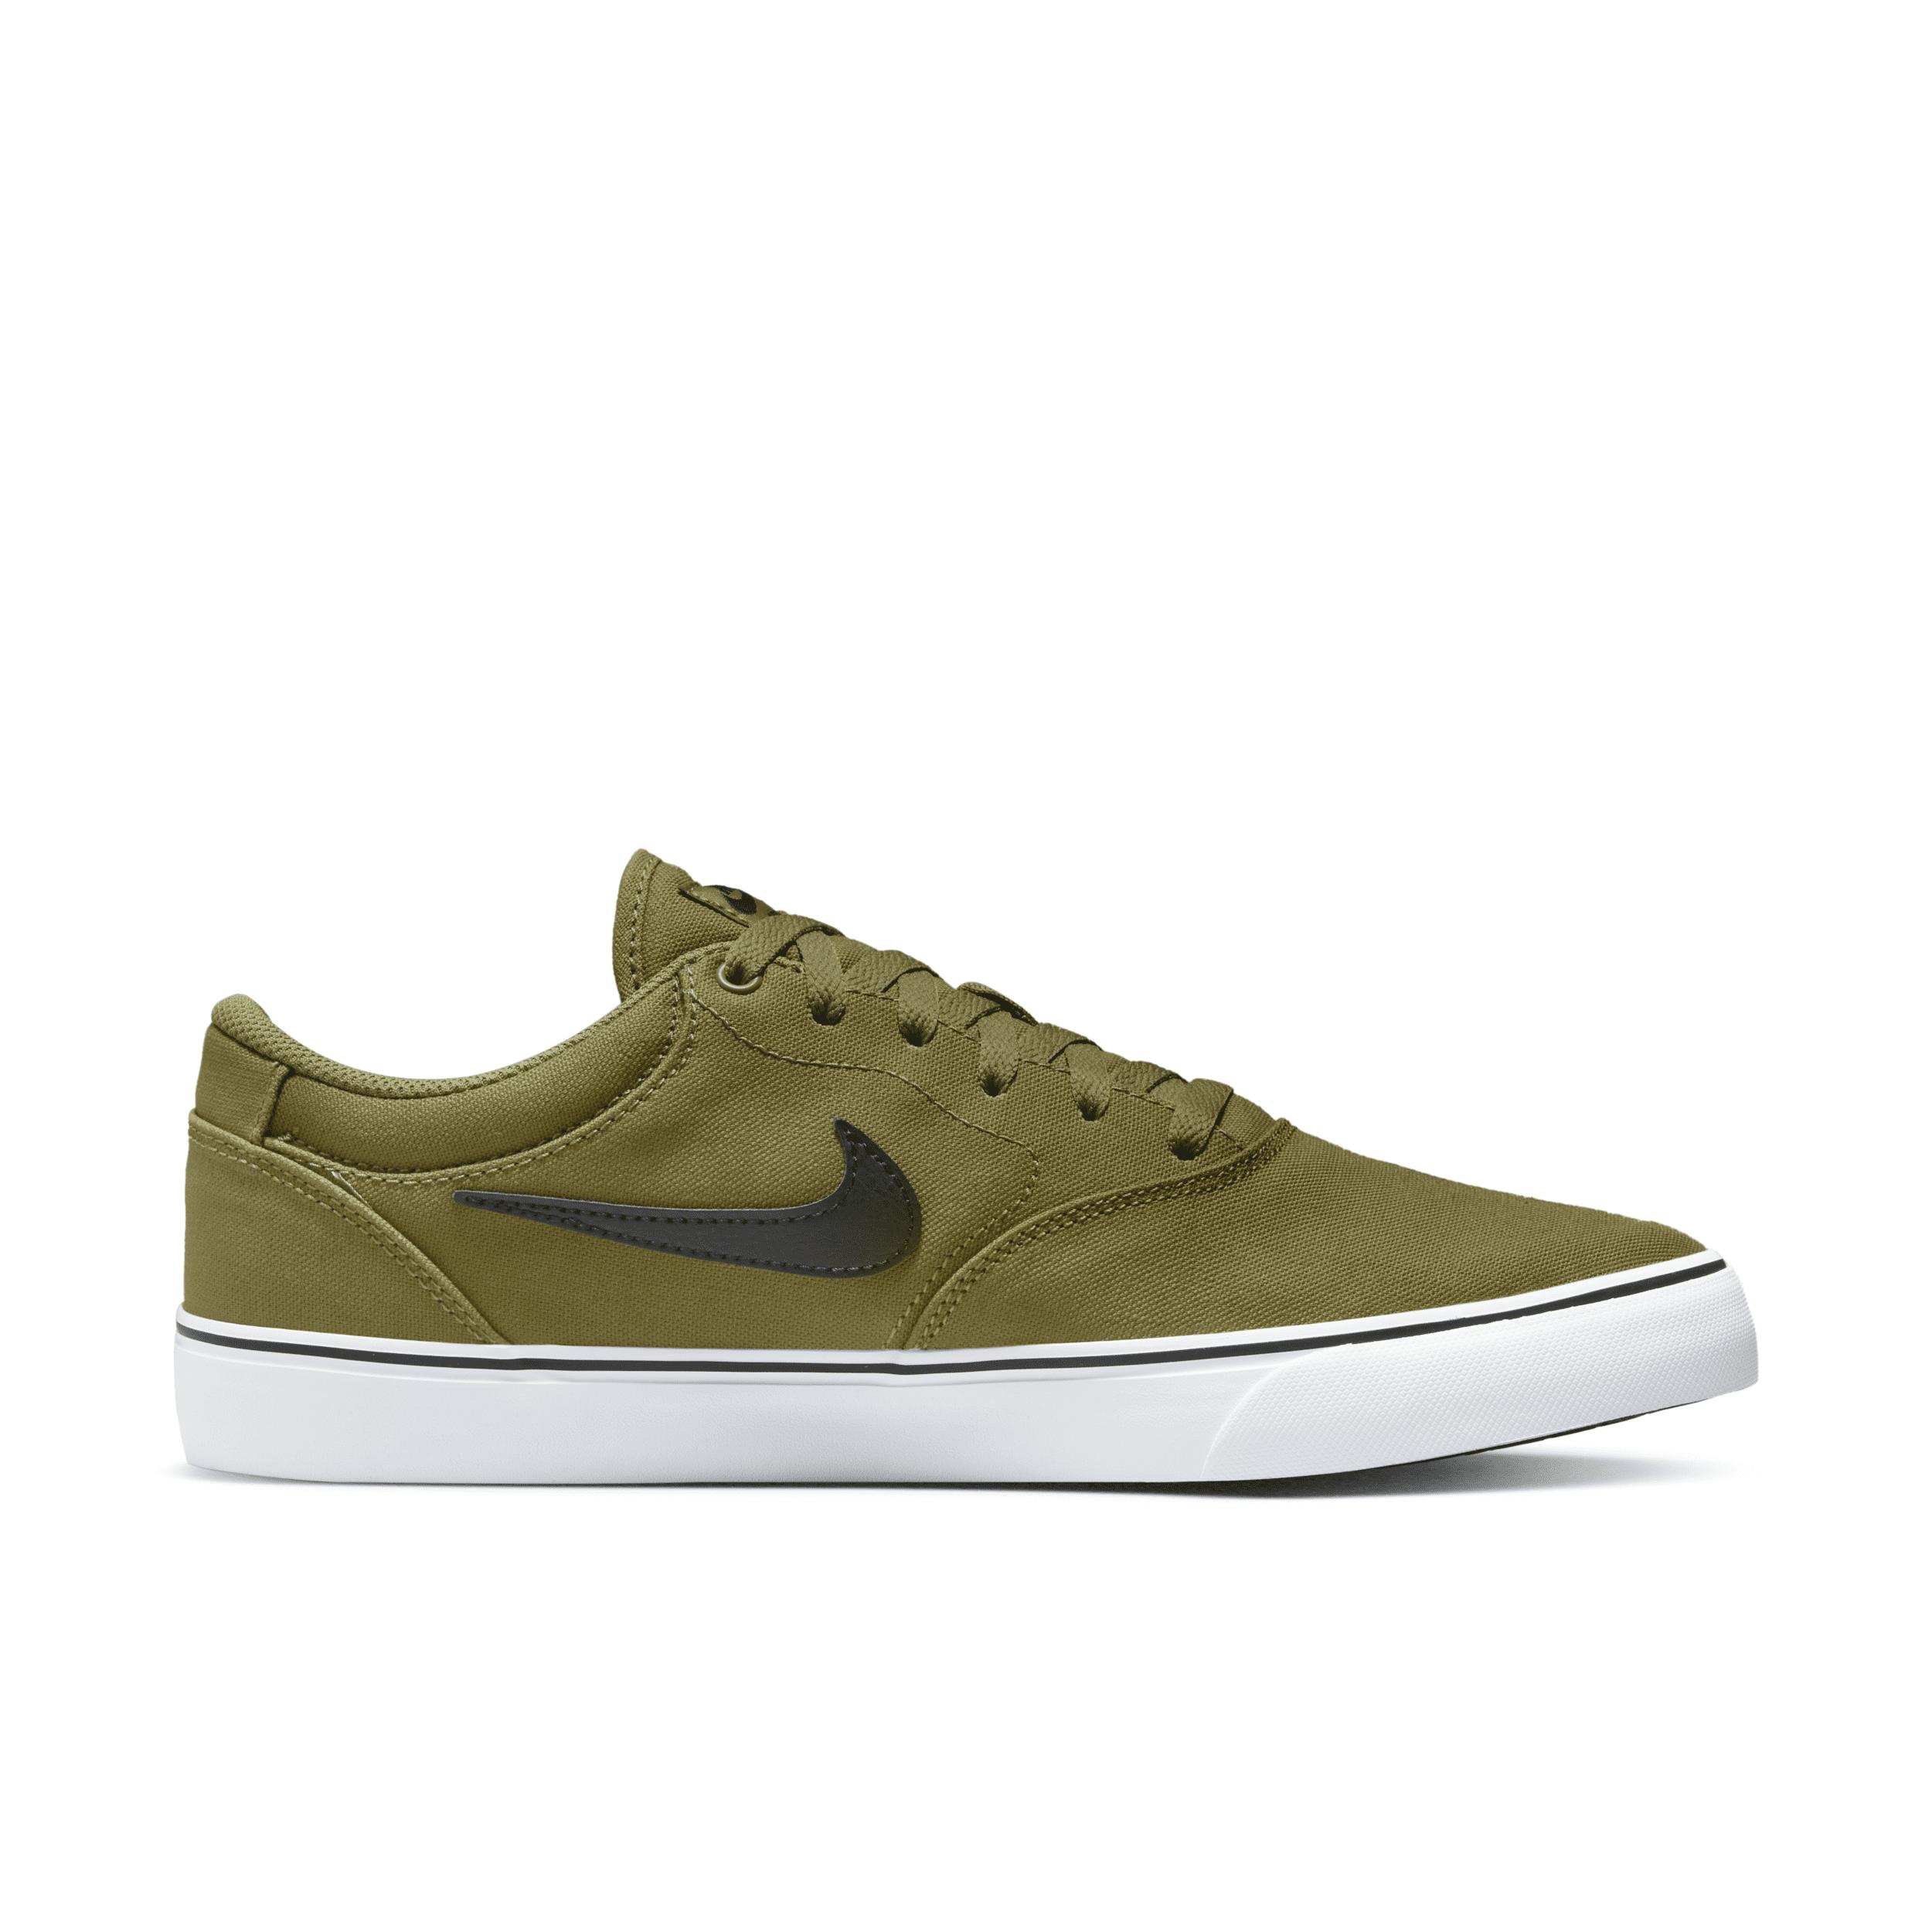 Nike Sb 2 Canvas Skate Shoes in Green | Lyst